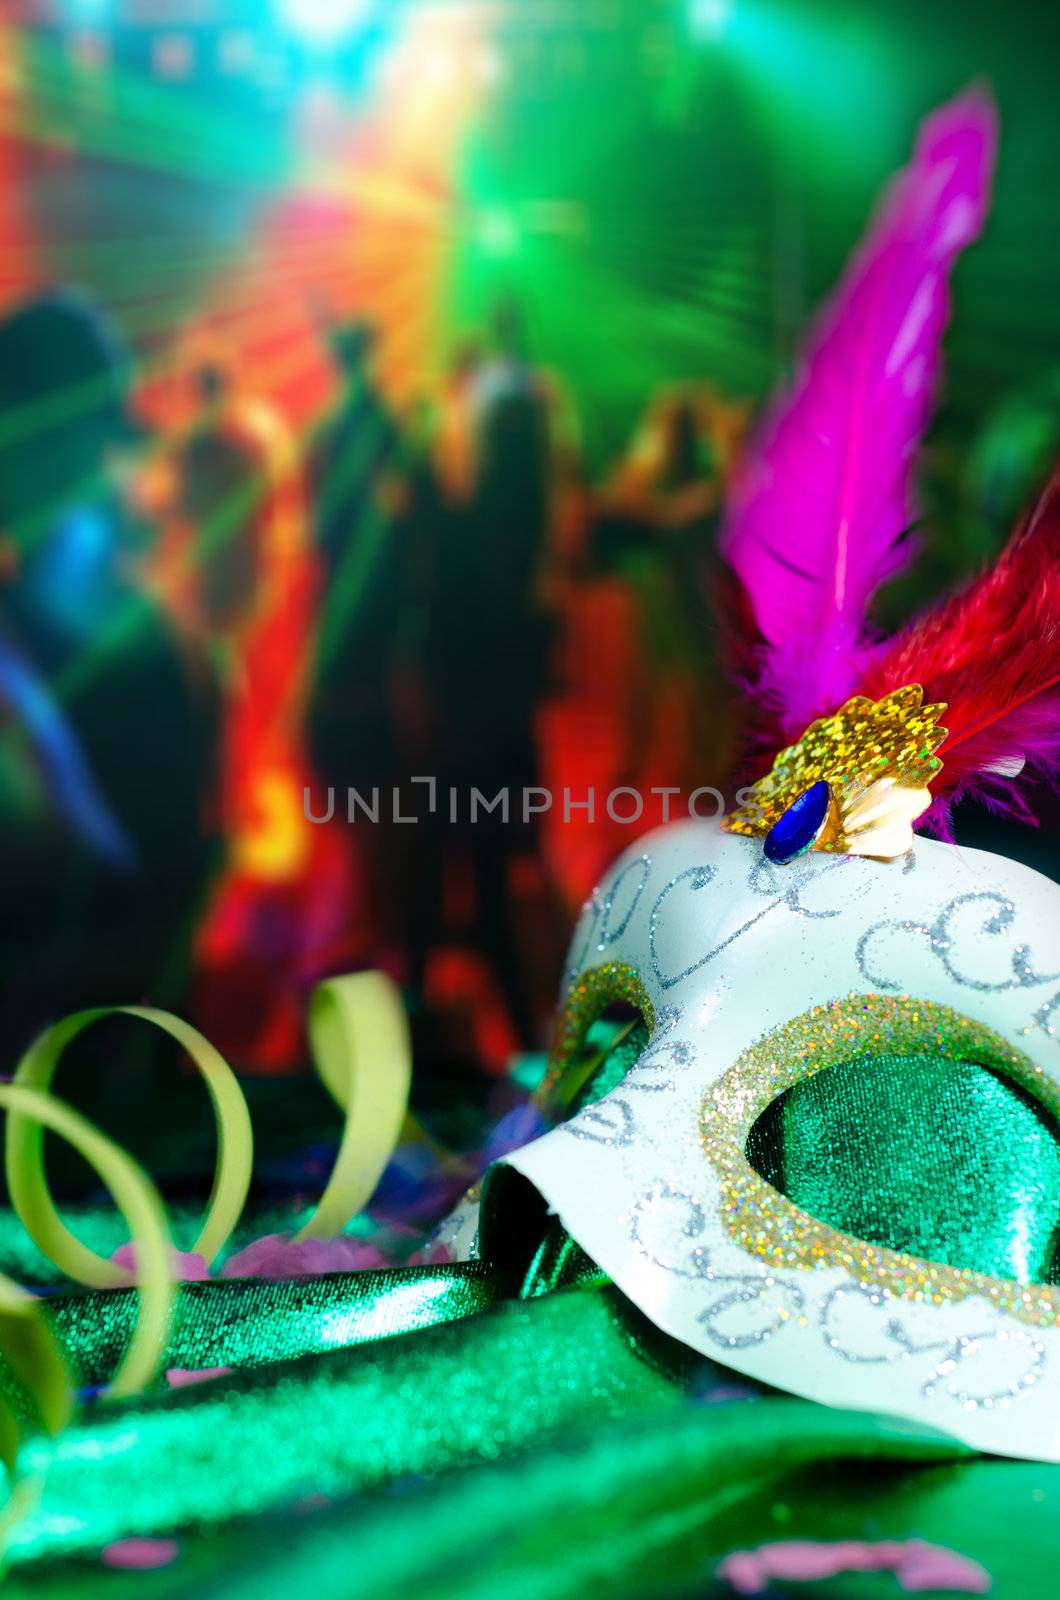 Carnival mask on the table with a great party going in the background with people dancing.